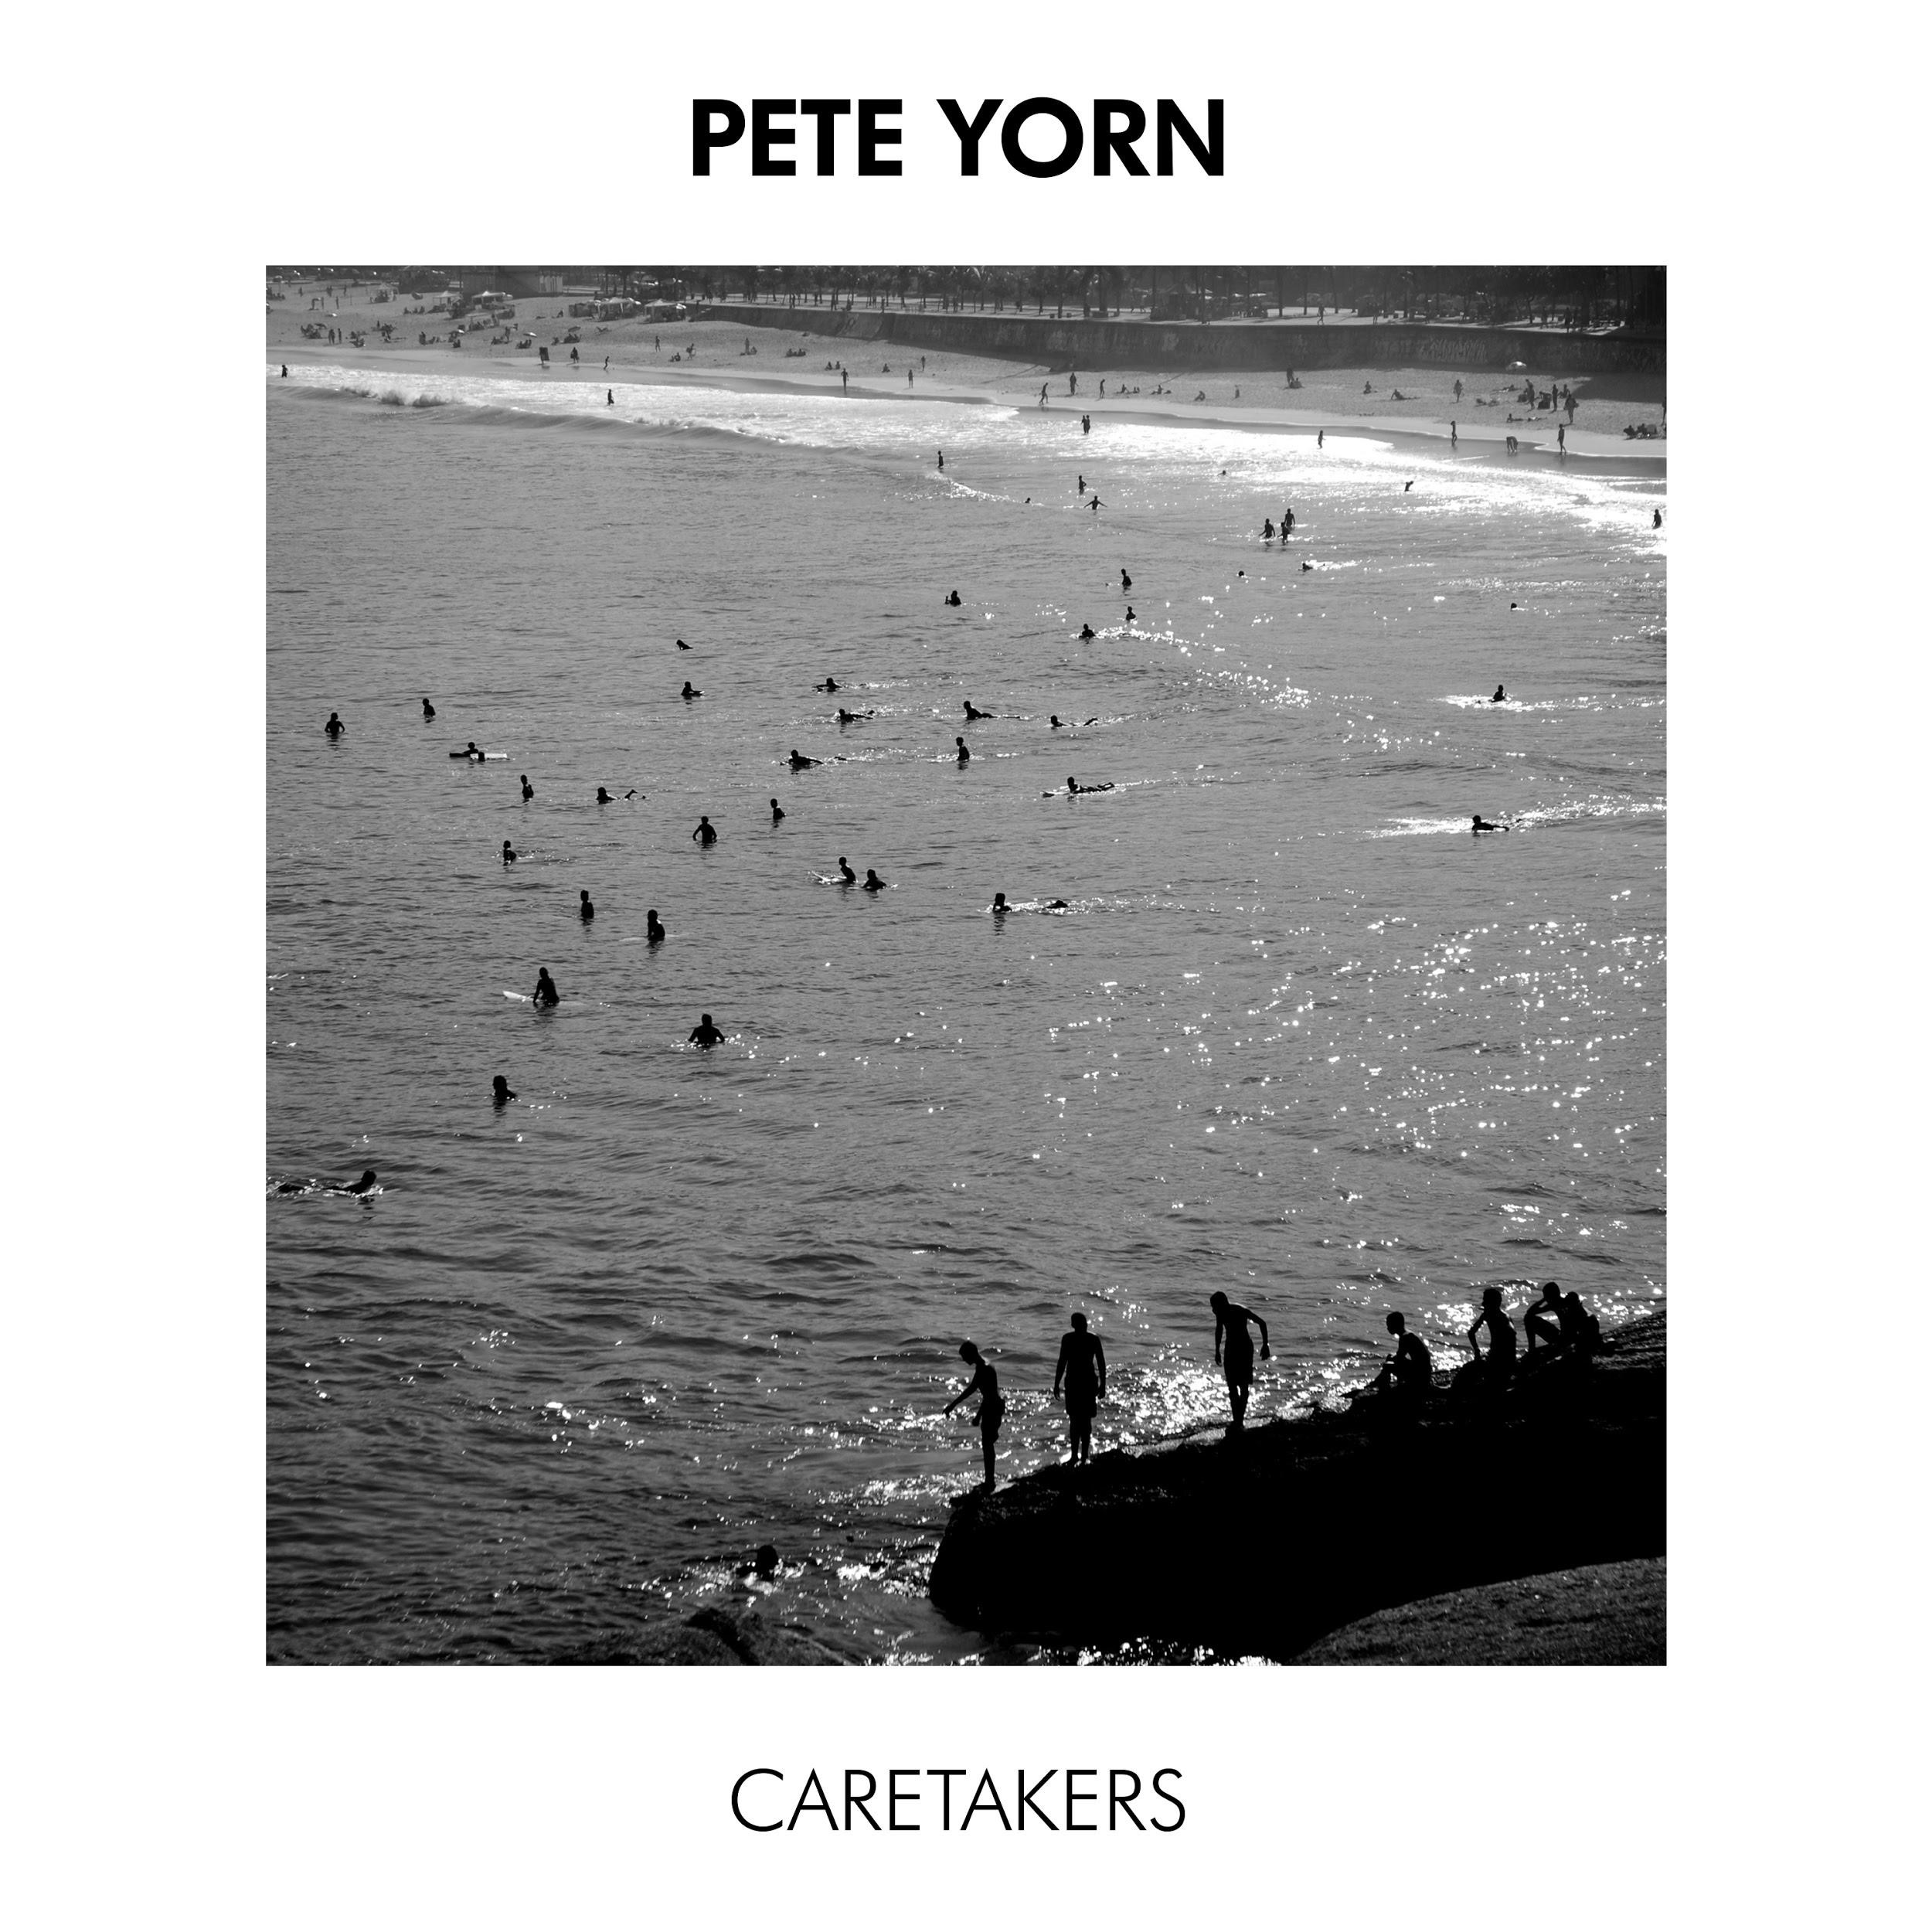 Pete Yorn set to release 'Caretakers' on August 9th